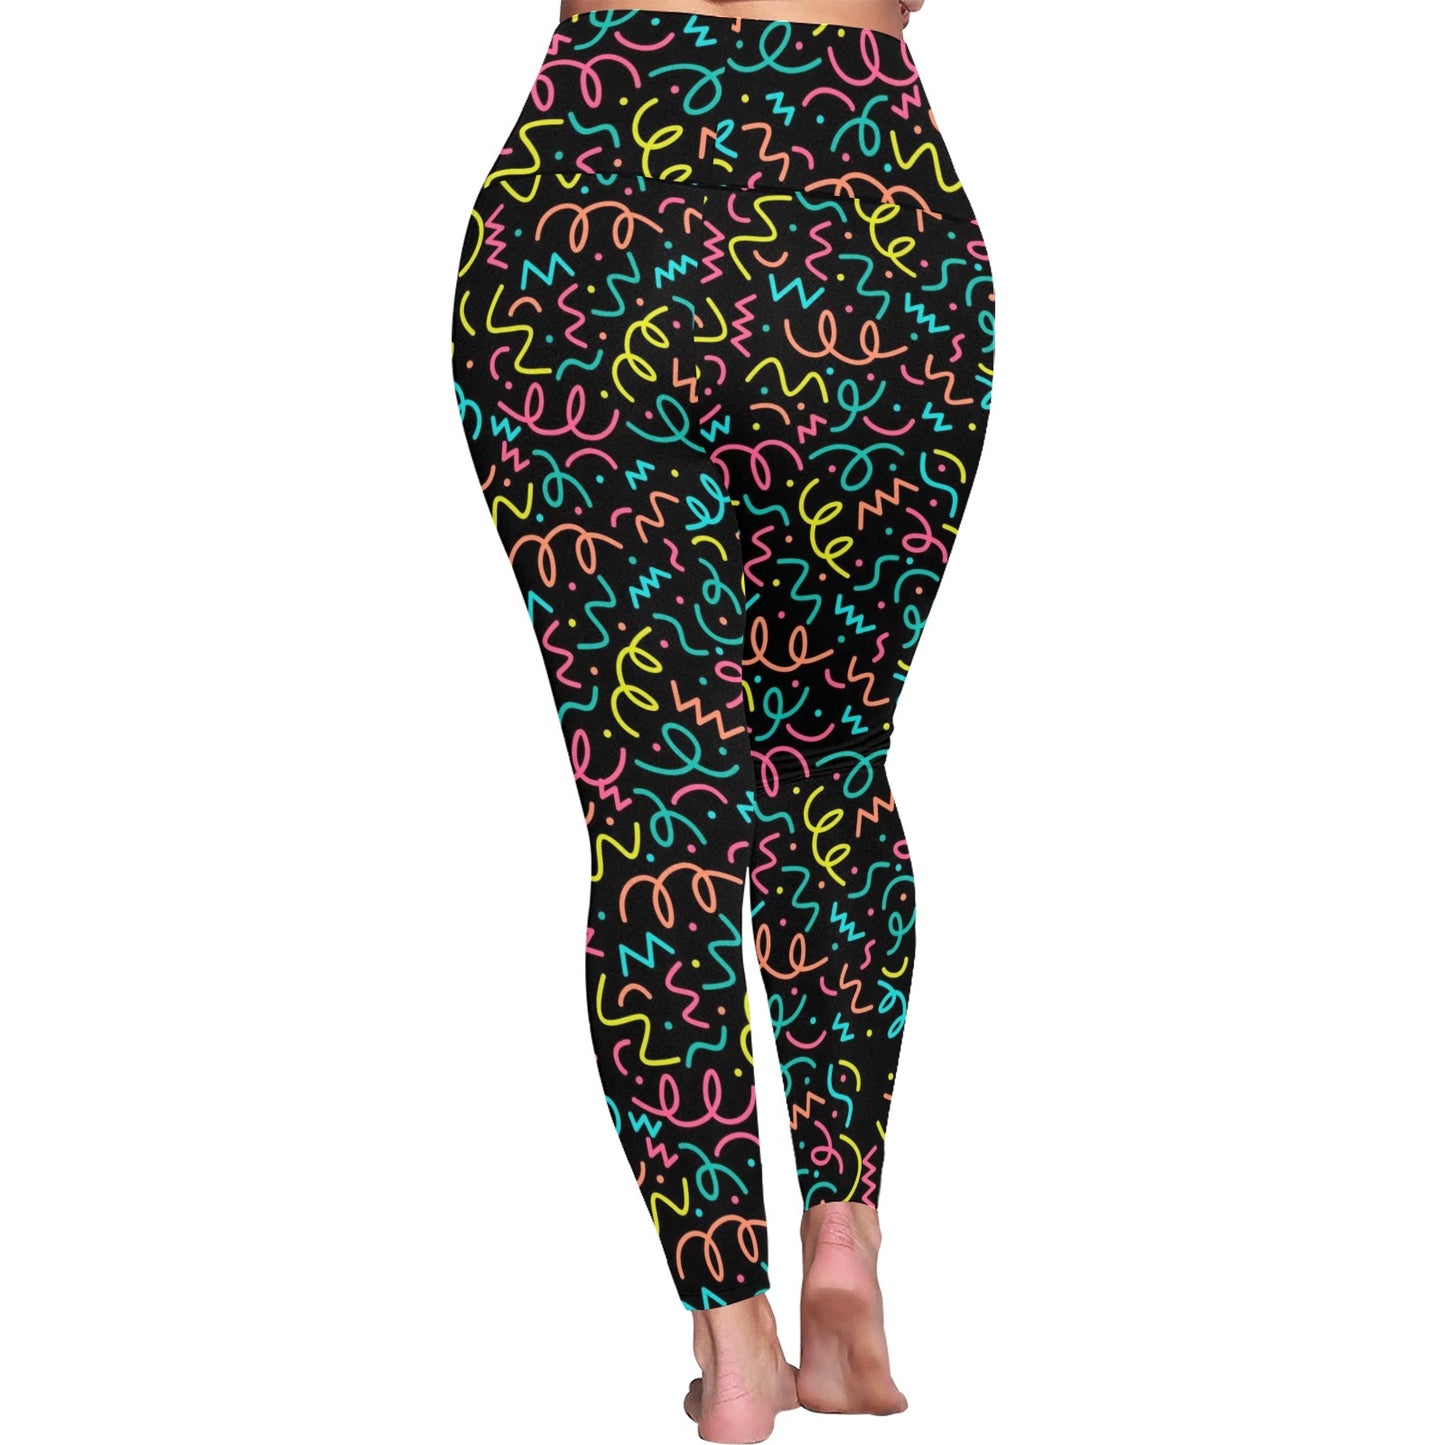 Squiggle Time - Women's Plus Size High Waist Leggings Women's Plus Size High Waist Leggings